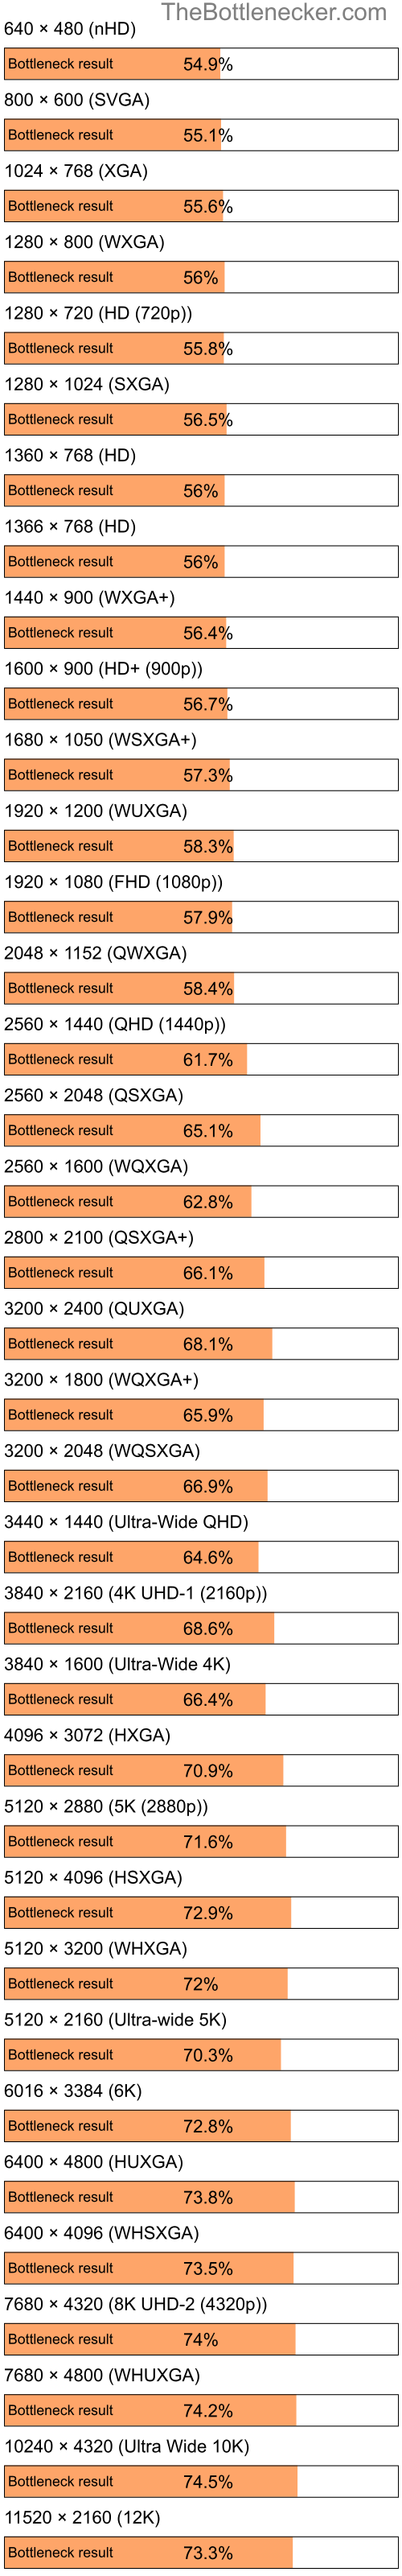 Bottleneck results by resolution for Intel Pentium 4 and AMD Mobility Radeon HD 4250 in Processor Intense Tasks